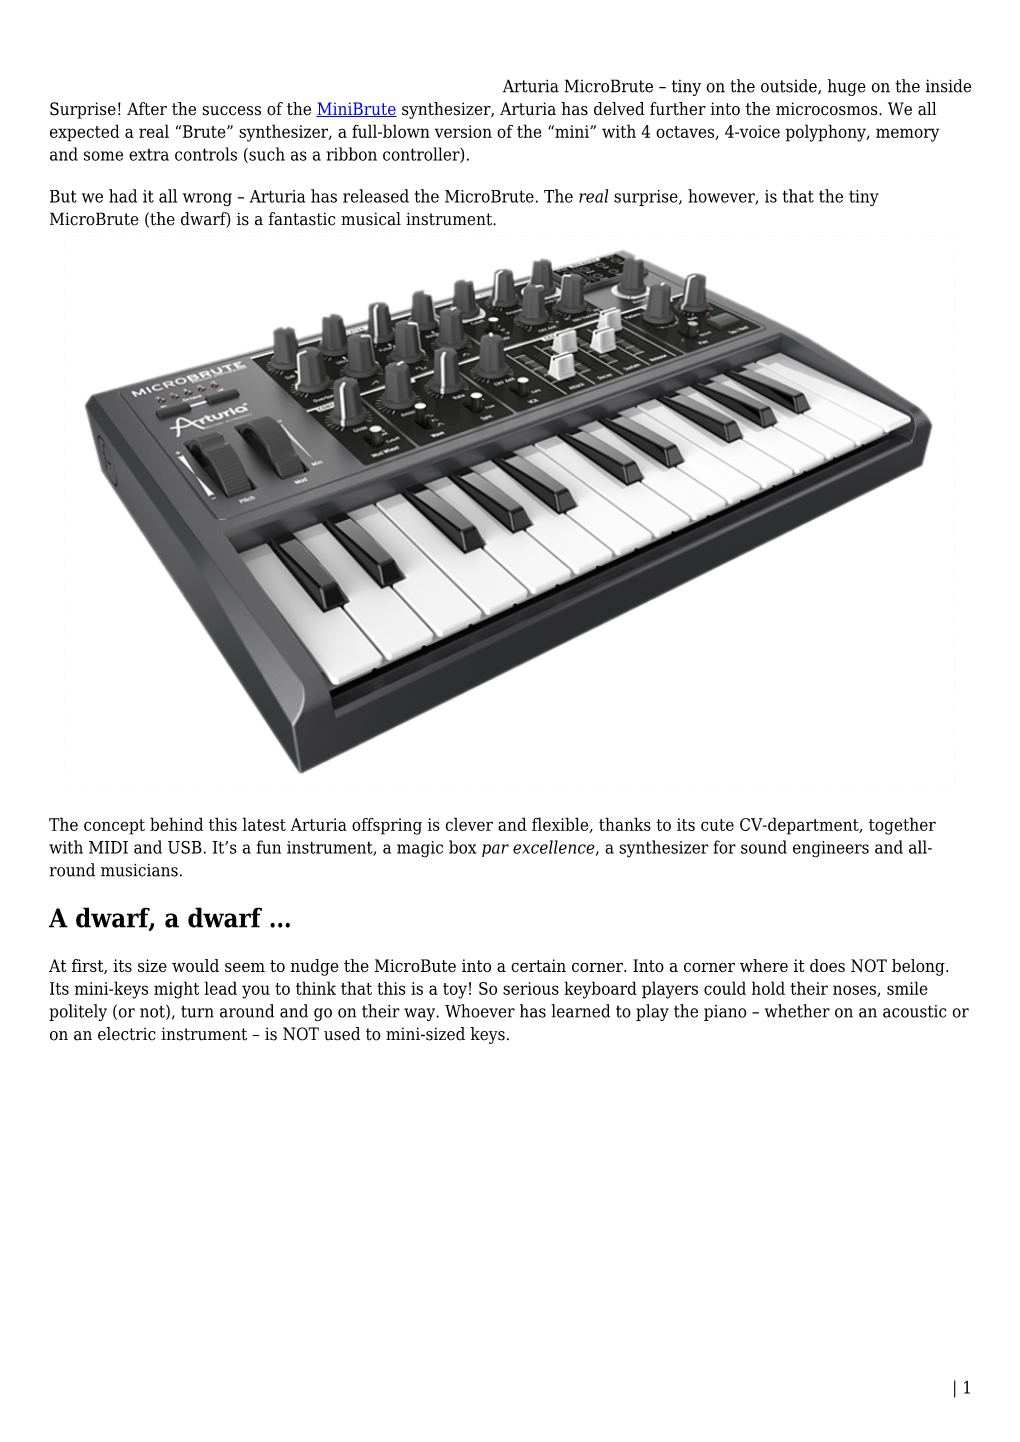 Arturia Microbrute – Tiny on the Outside, Huge on the Inside Surprise! After the Success of the Minibrute Synthesizer, Arturia Has Delved Further Into the Microcosmos